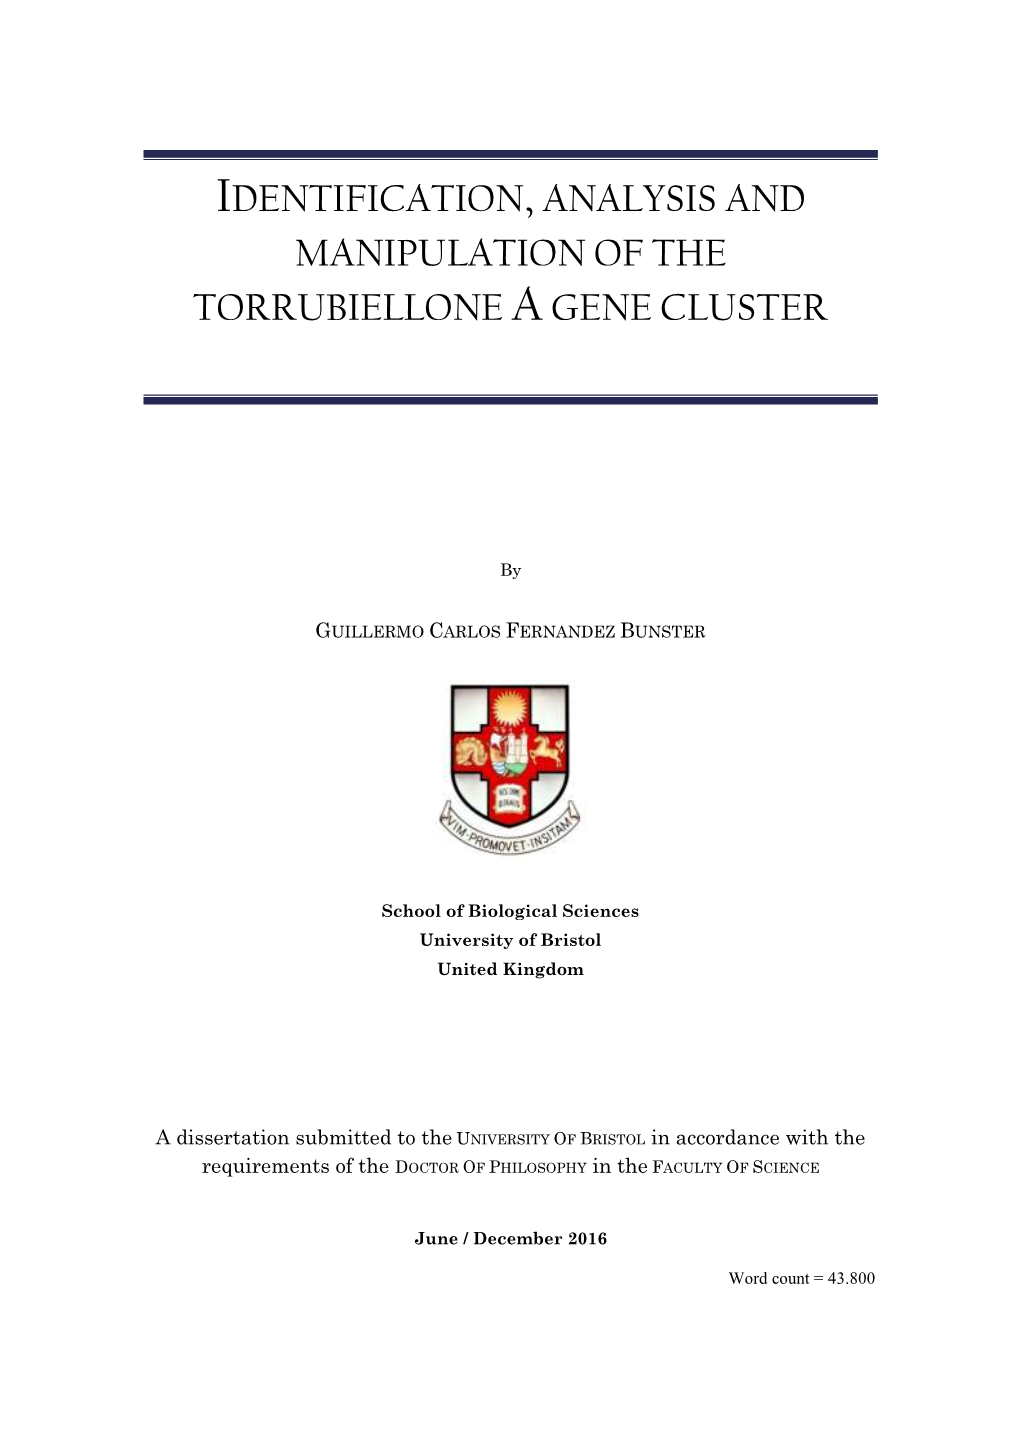 Identification, Analysis and Manipulation of the Torrubiellone a Gene Cluster